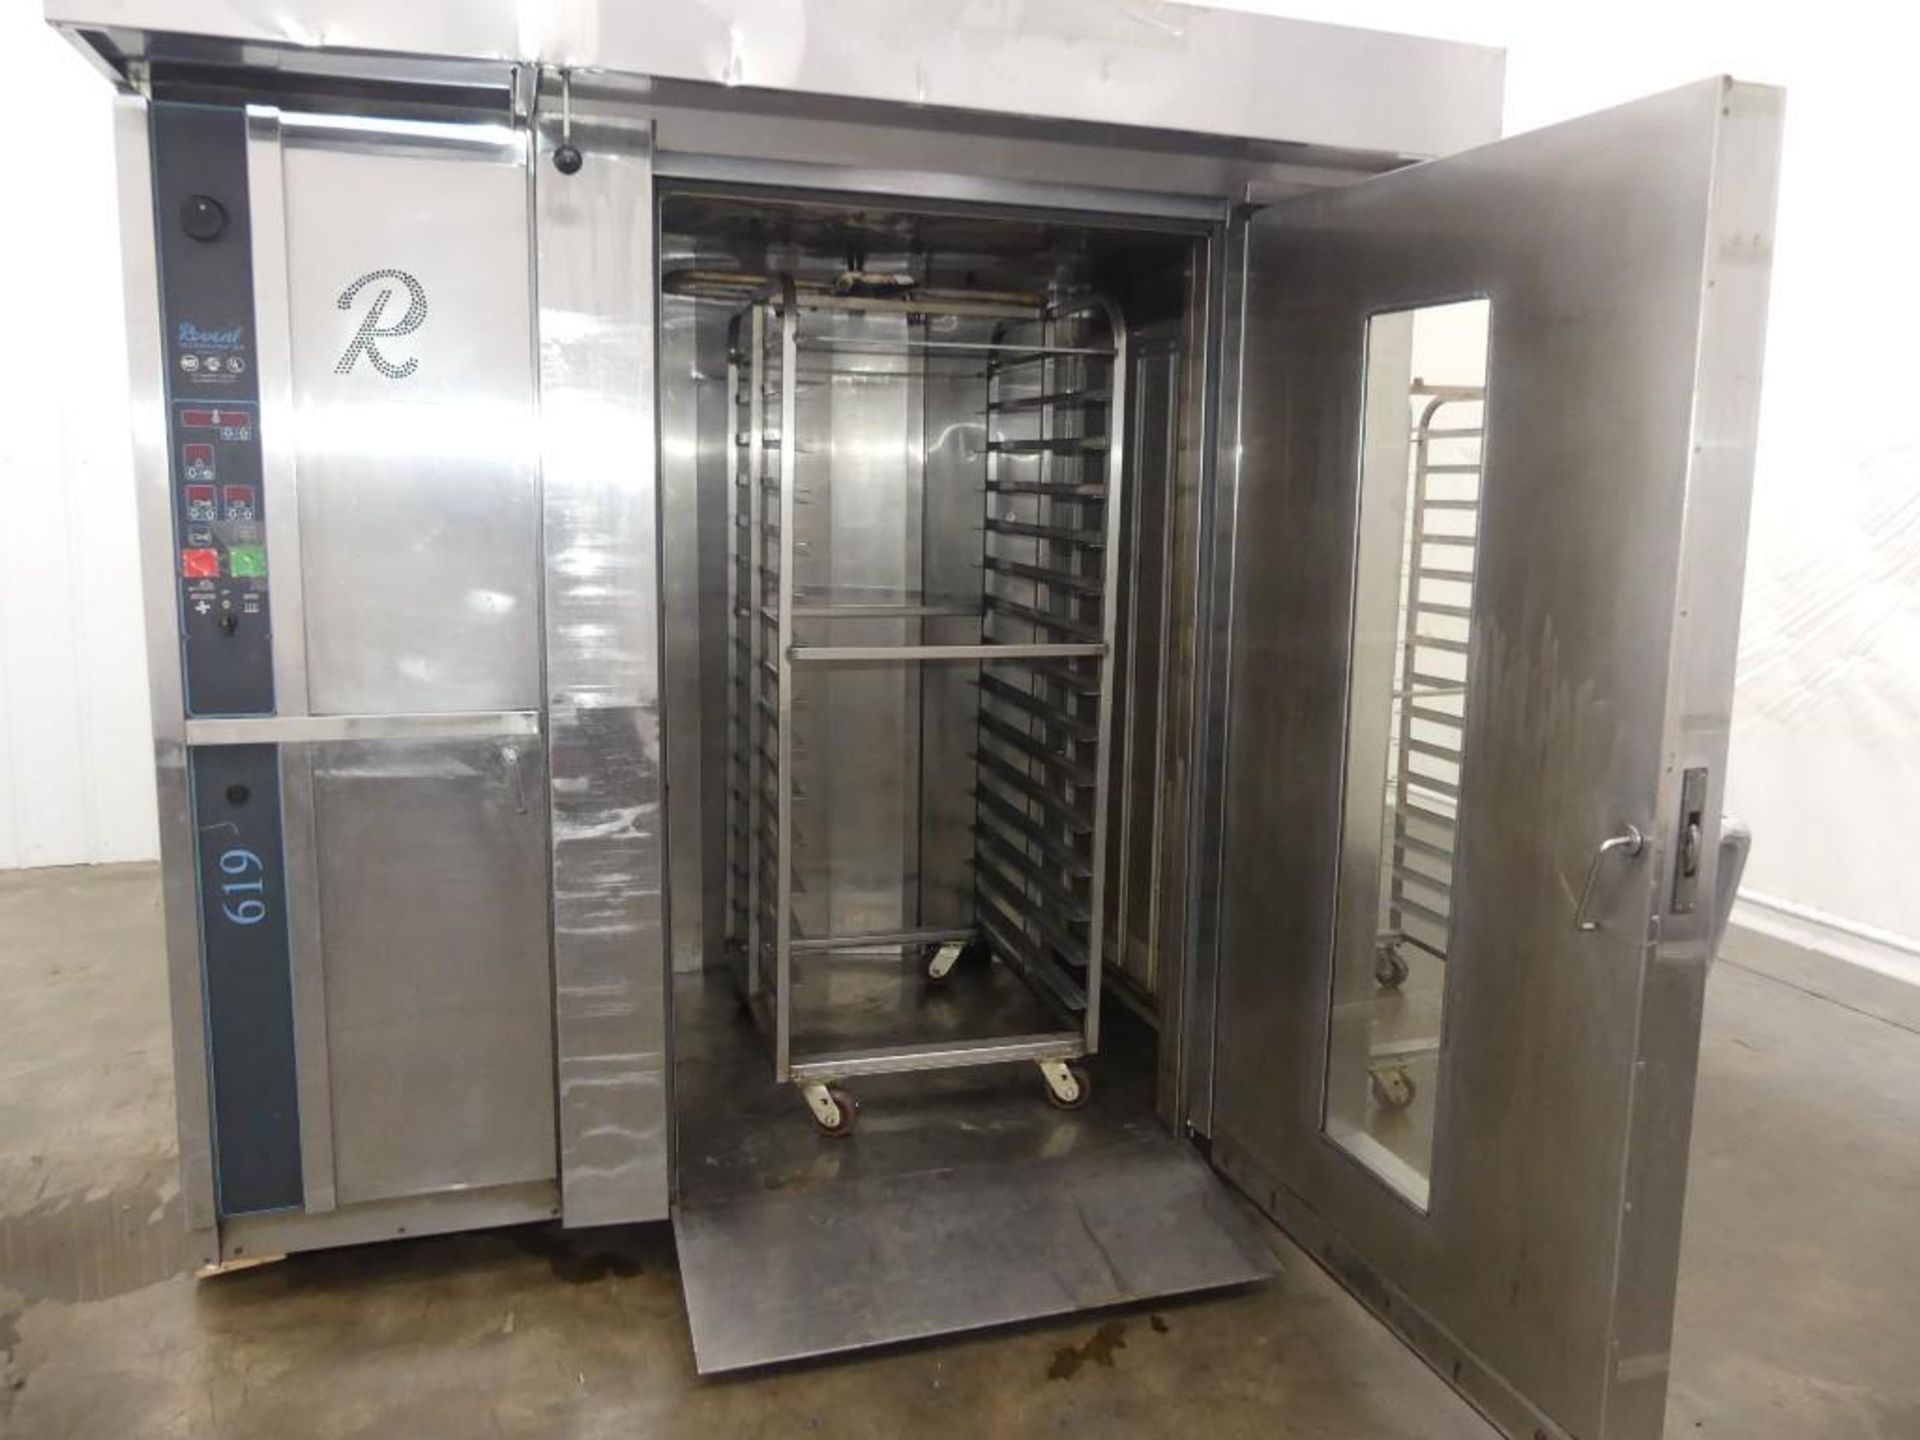 Revent 619 G DG 318,000 BTU Natural Gas-Fired Double Rack Oven - Image 10 of 28